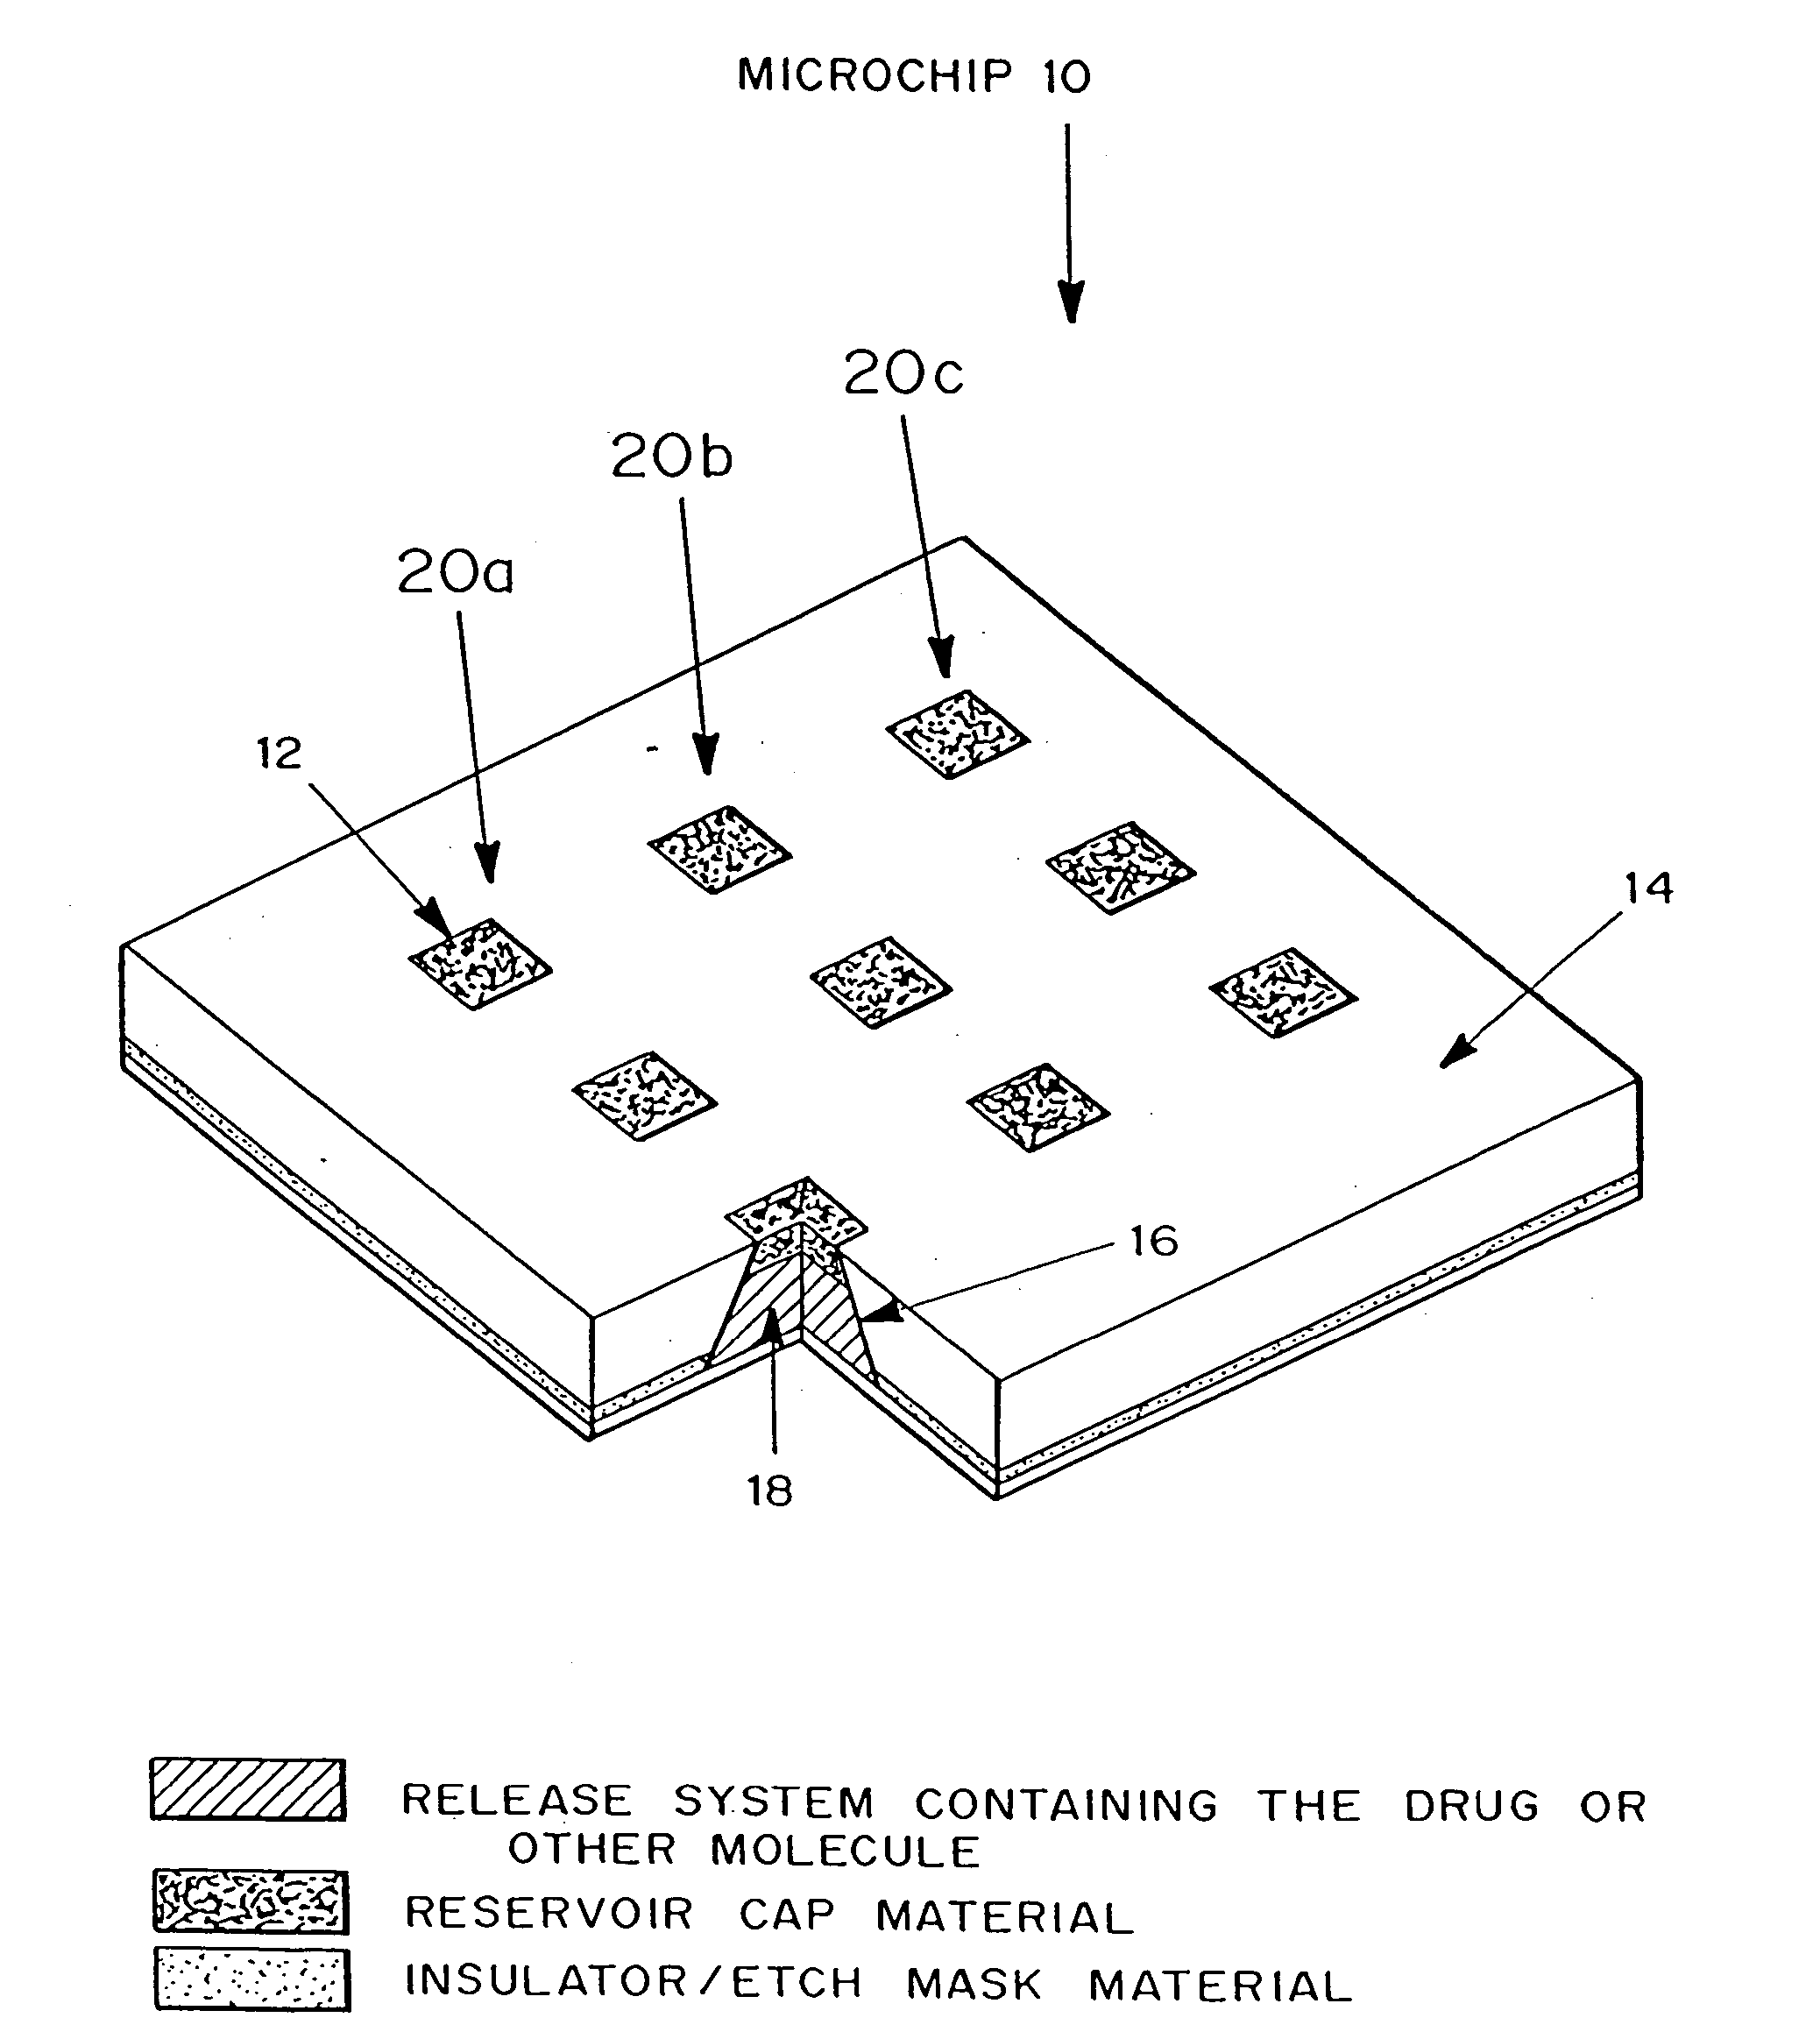 Medical device with controlled reservoir opening